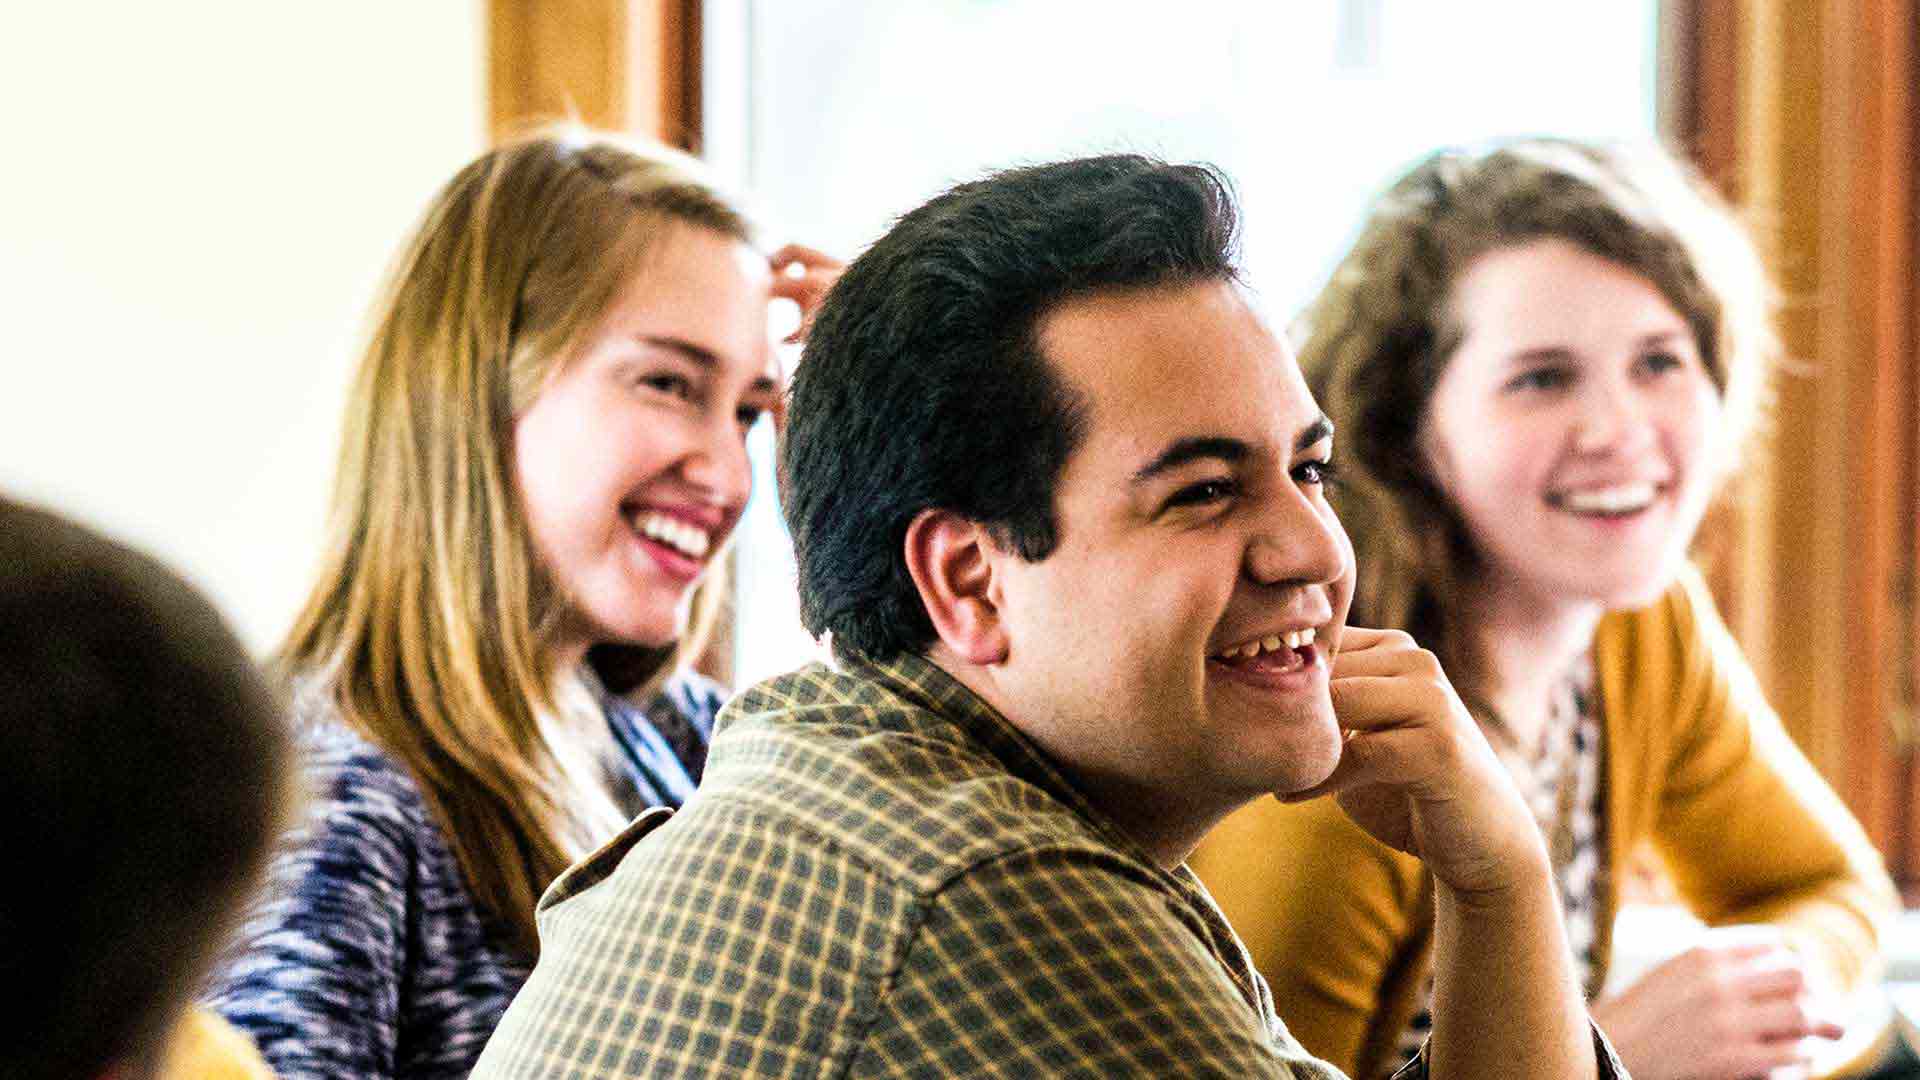 University of St. Thomas students laugh during a class.